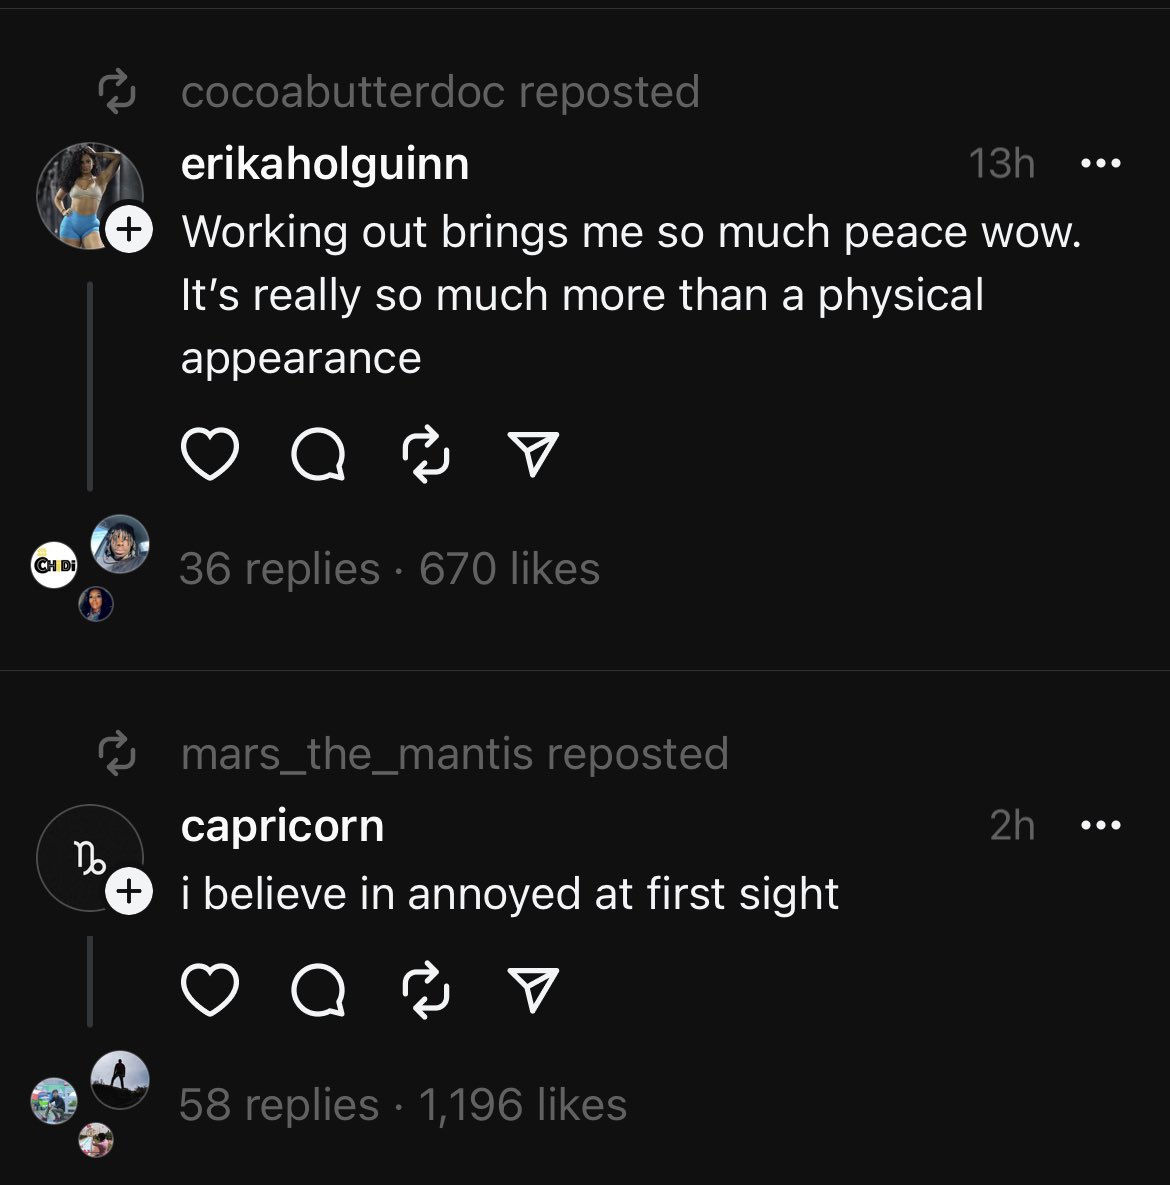 best threads of the week - screenshot - Ch Di D cocoabutterdoc reposted erikaholguinn 13h Working out brings me so much peace wow. It's really so much more than a physical appearance a 2 Y 36 replies 670 mars_the_mantis reposted capricorn i believe in ann